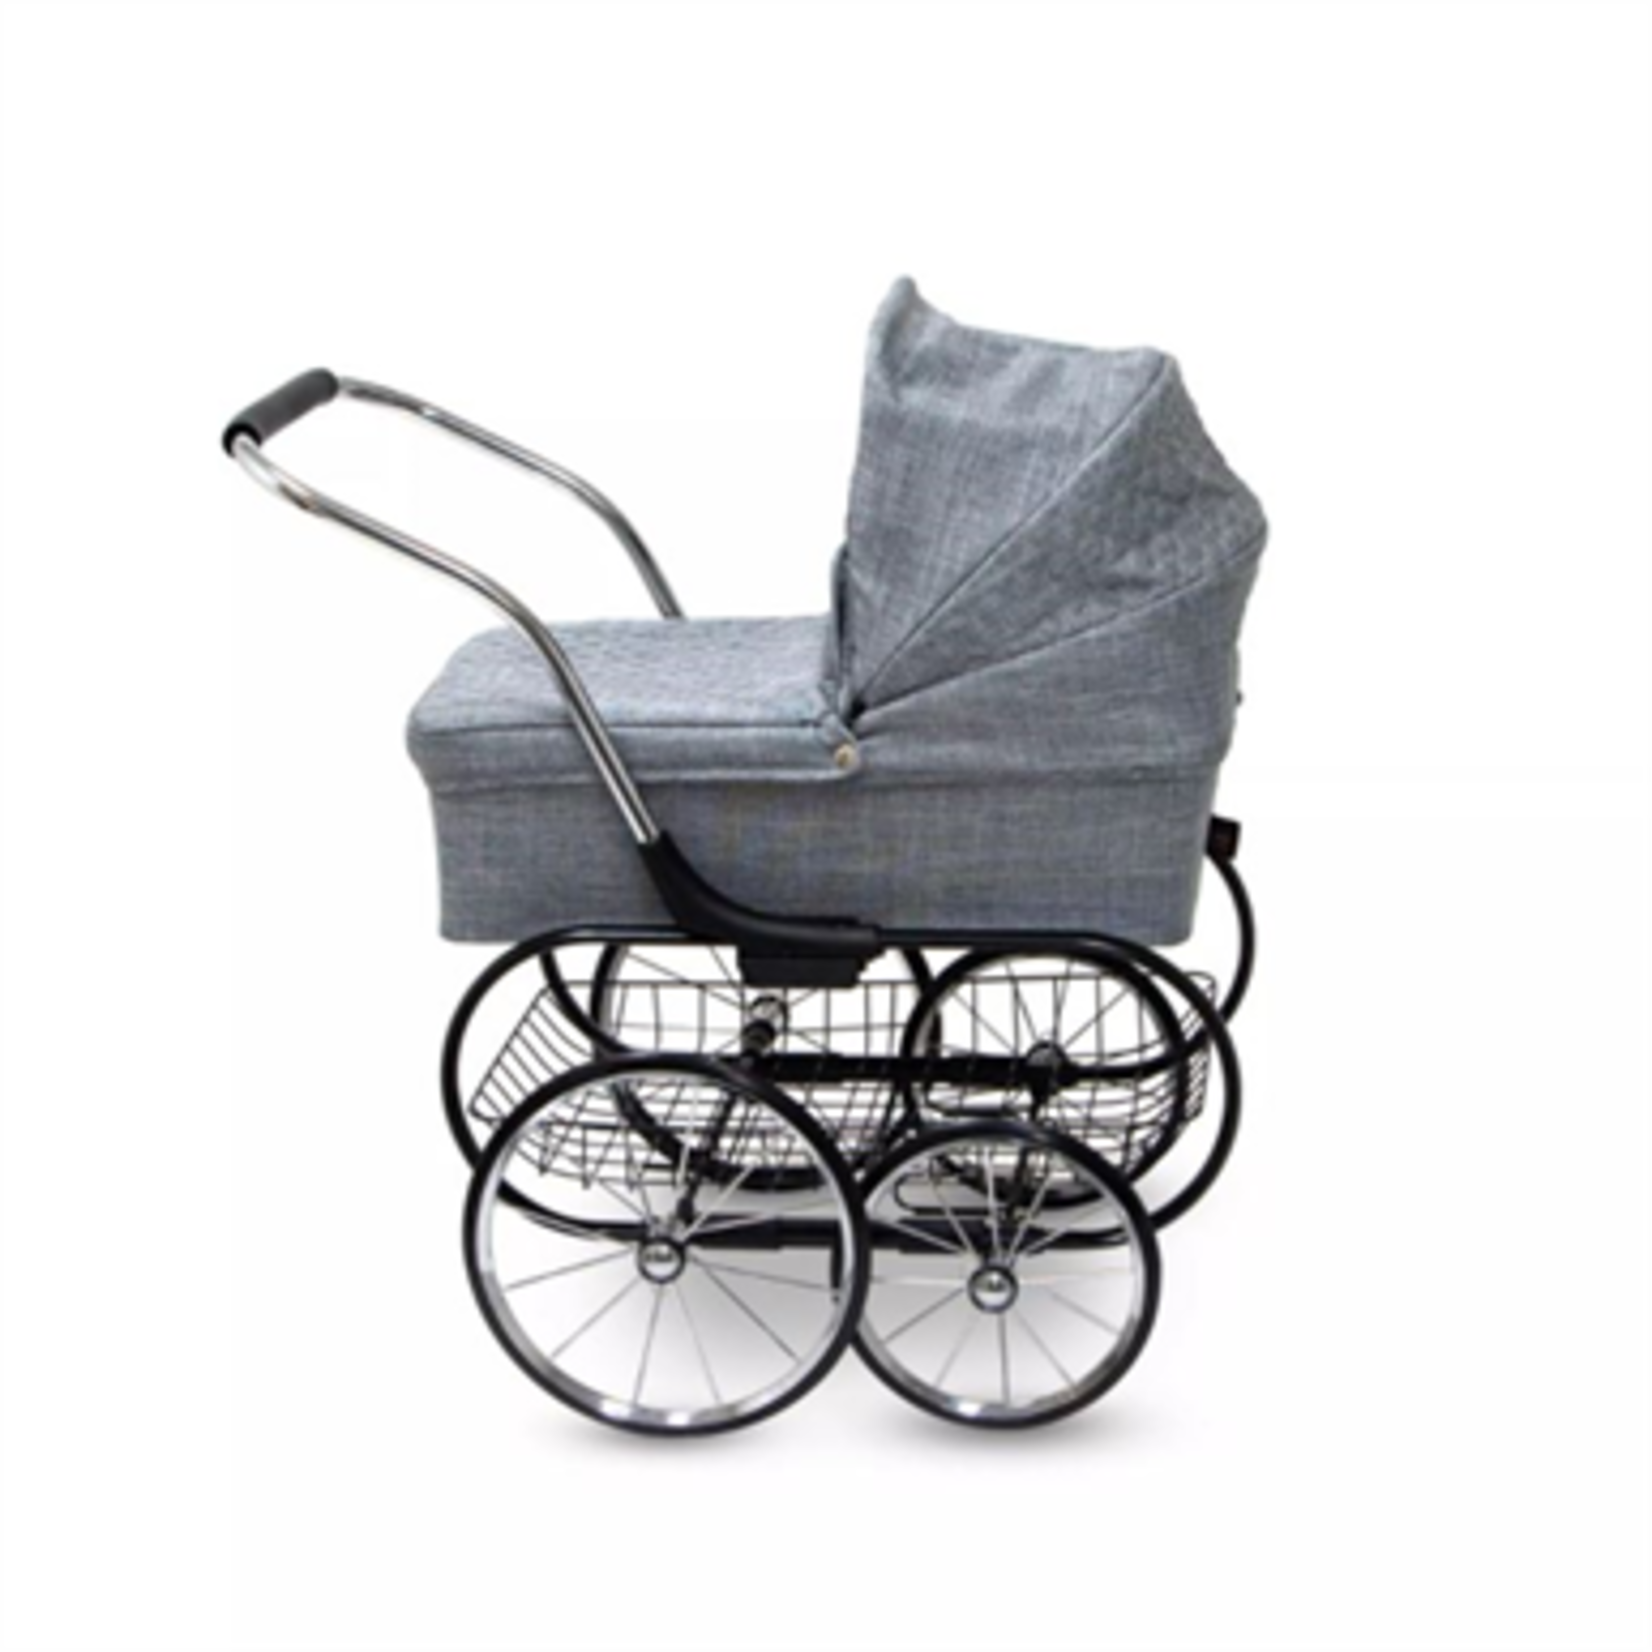 Valco Baby Royale Doll Stroller- Grey Marle